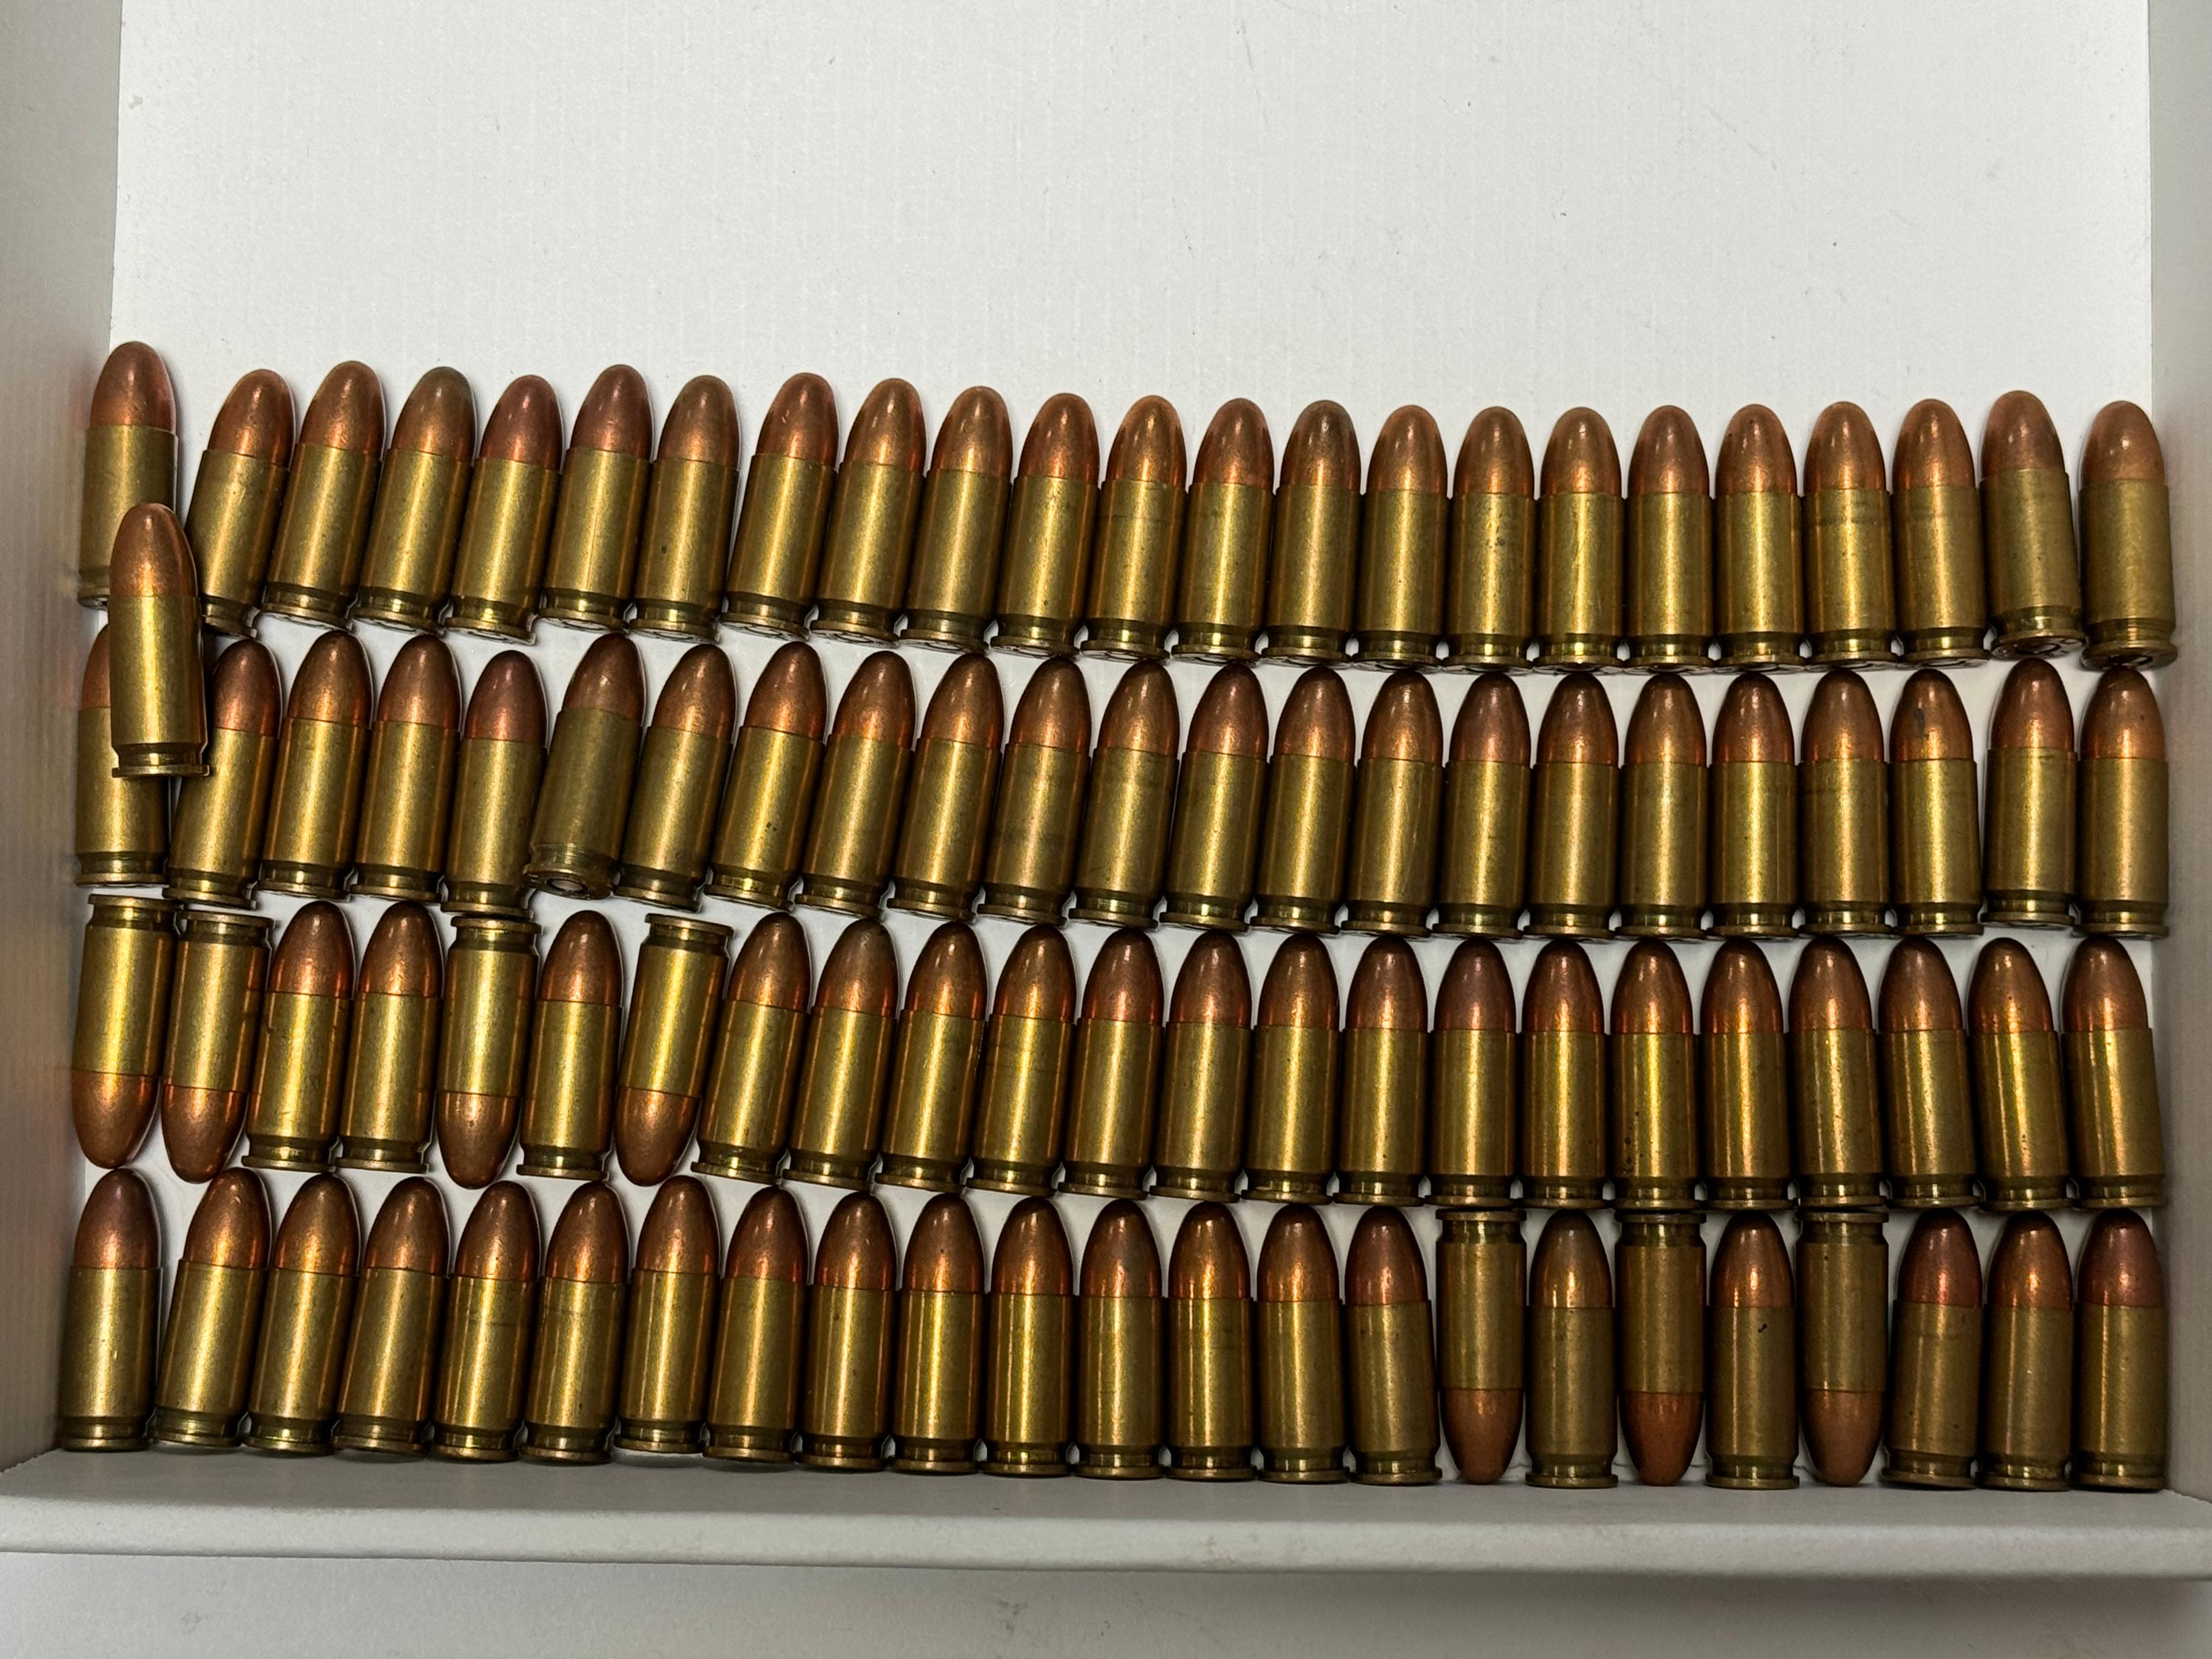 93rds. of Hot Egyptian SMG 9MM FMJ Ammunition